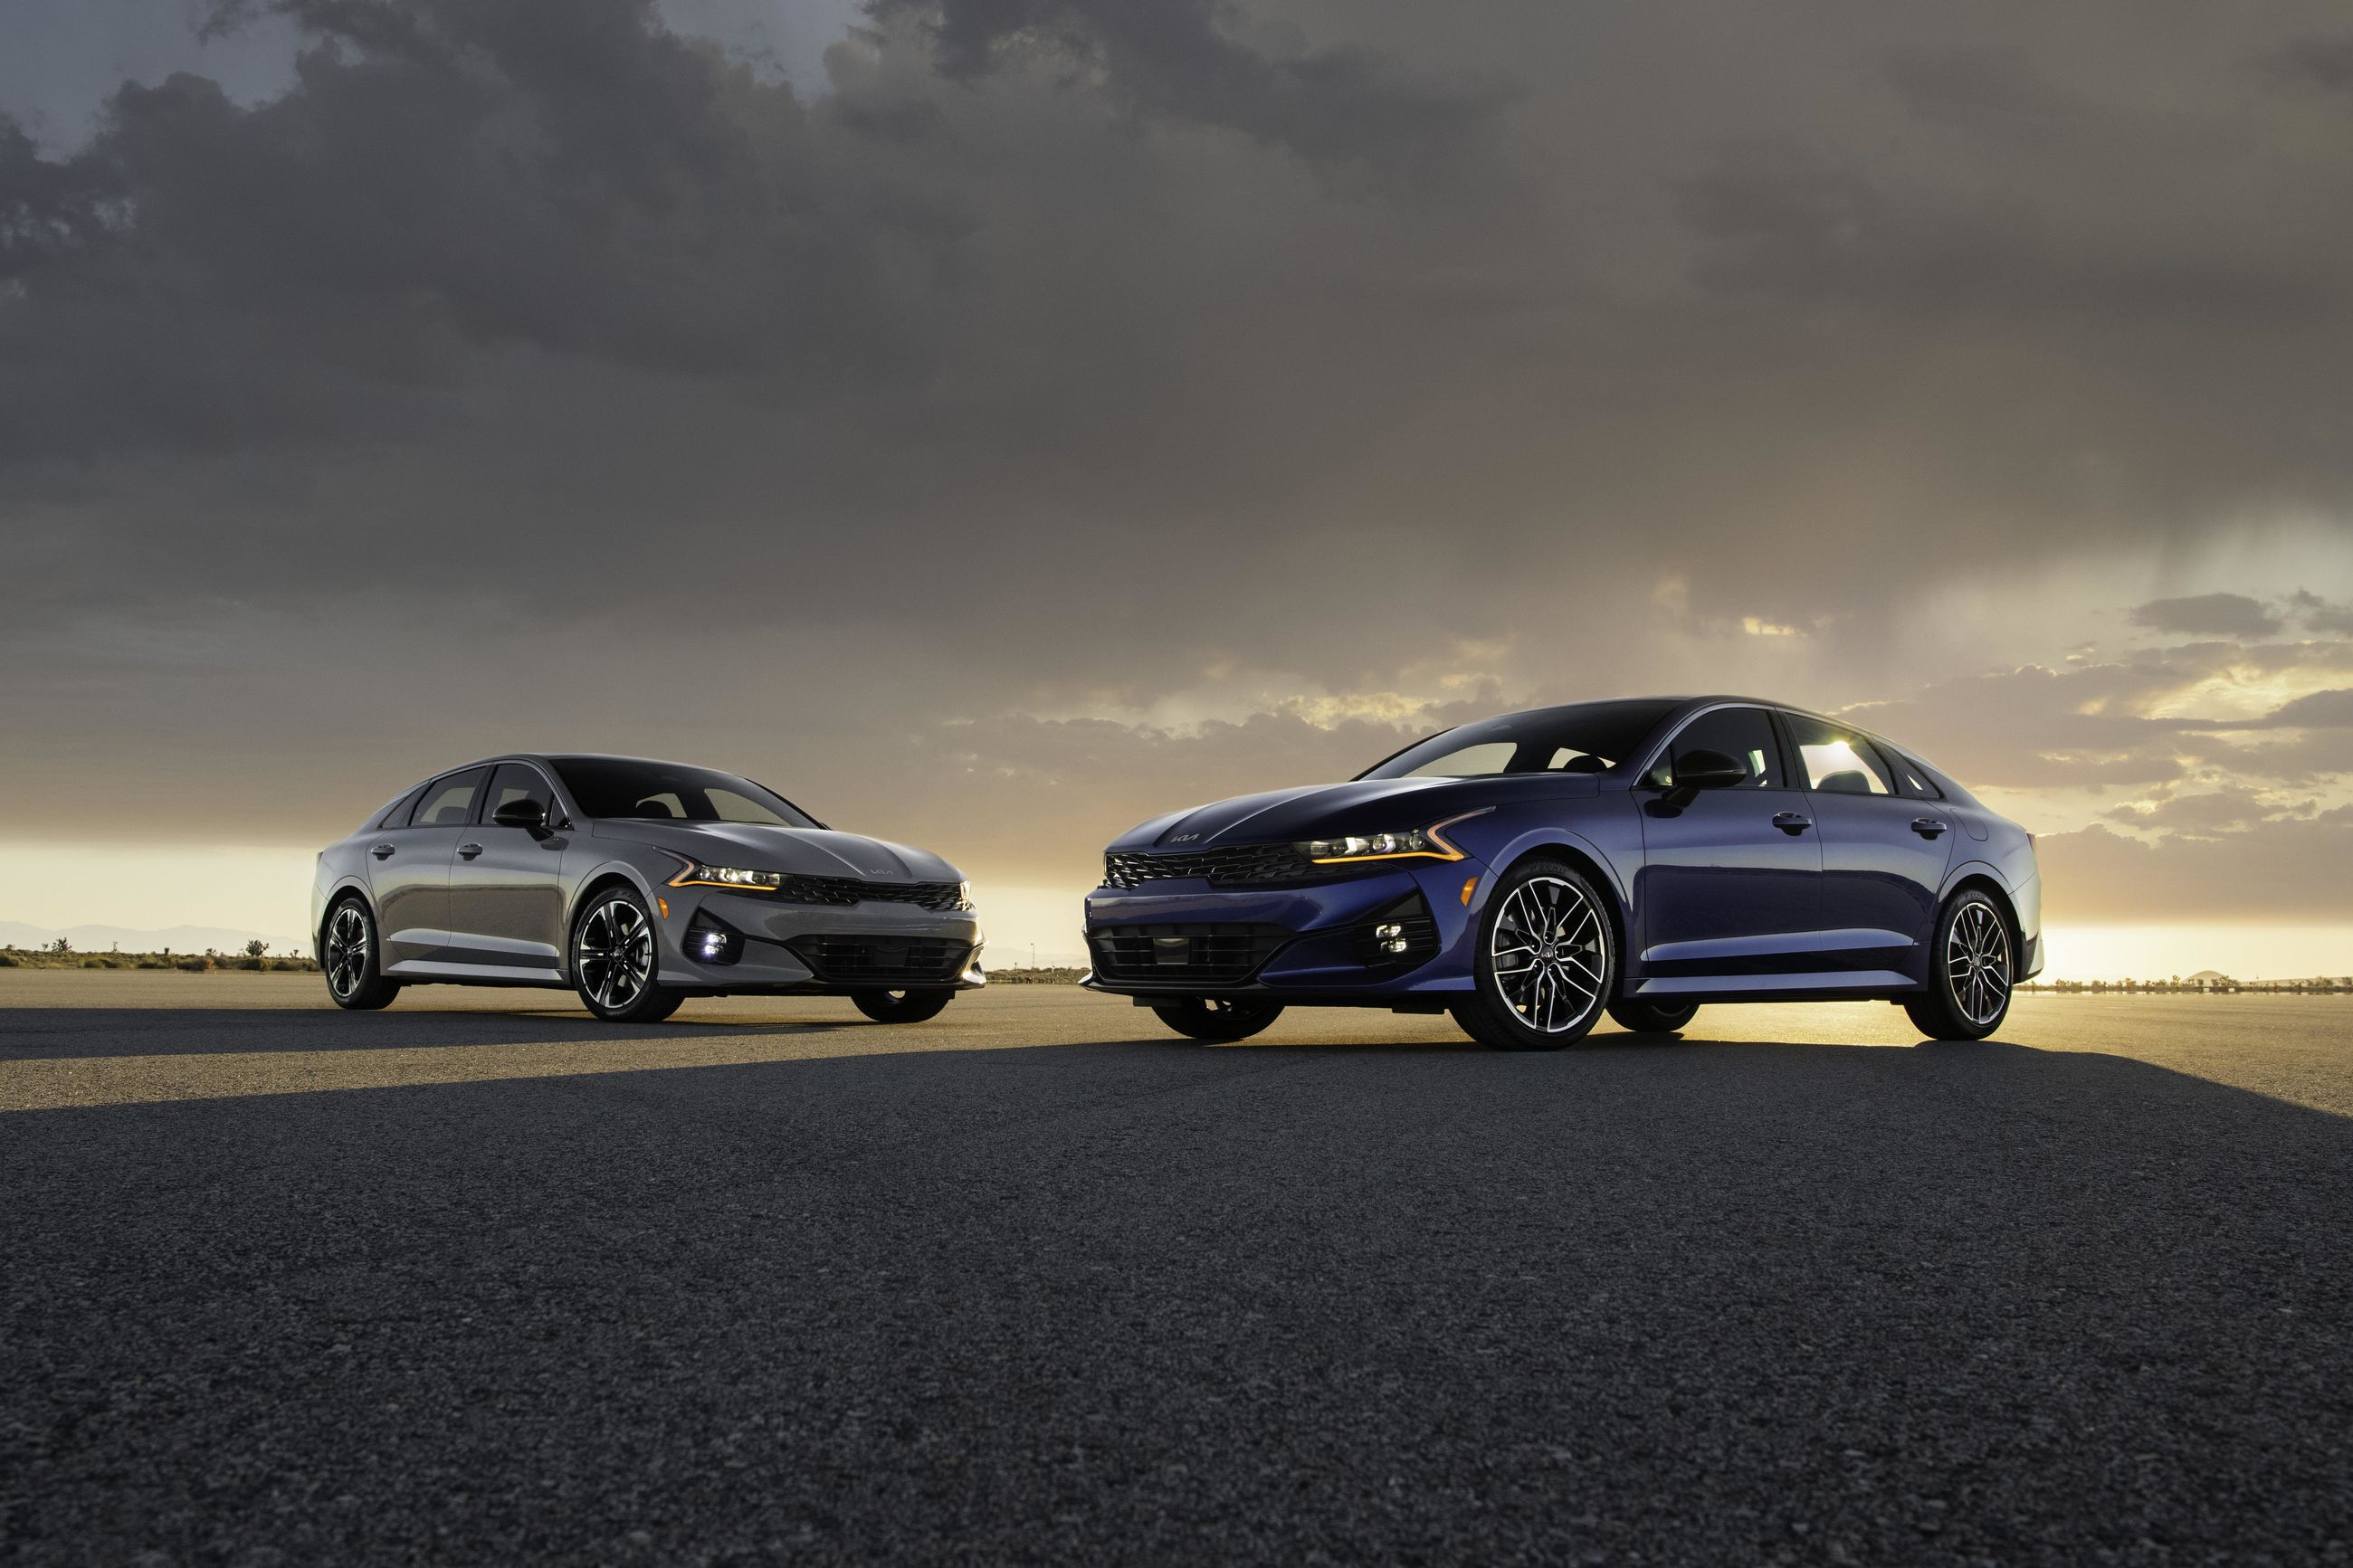 Kia receives the most model awards in the J.D. Power 2023 U.S. ALG Residual Value Awards